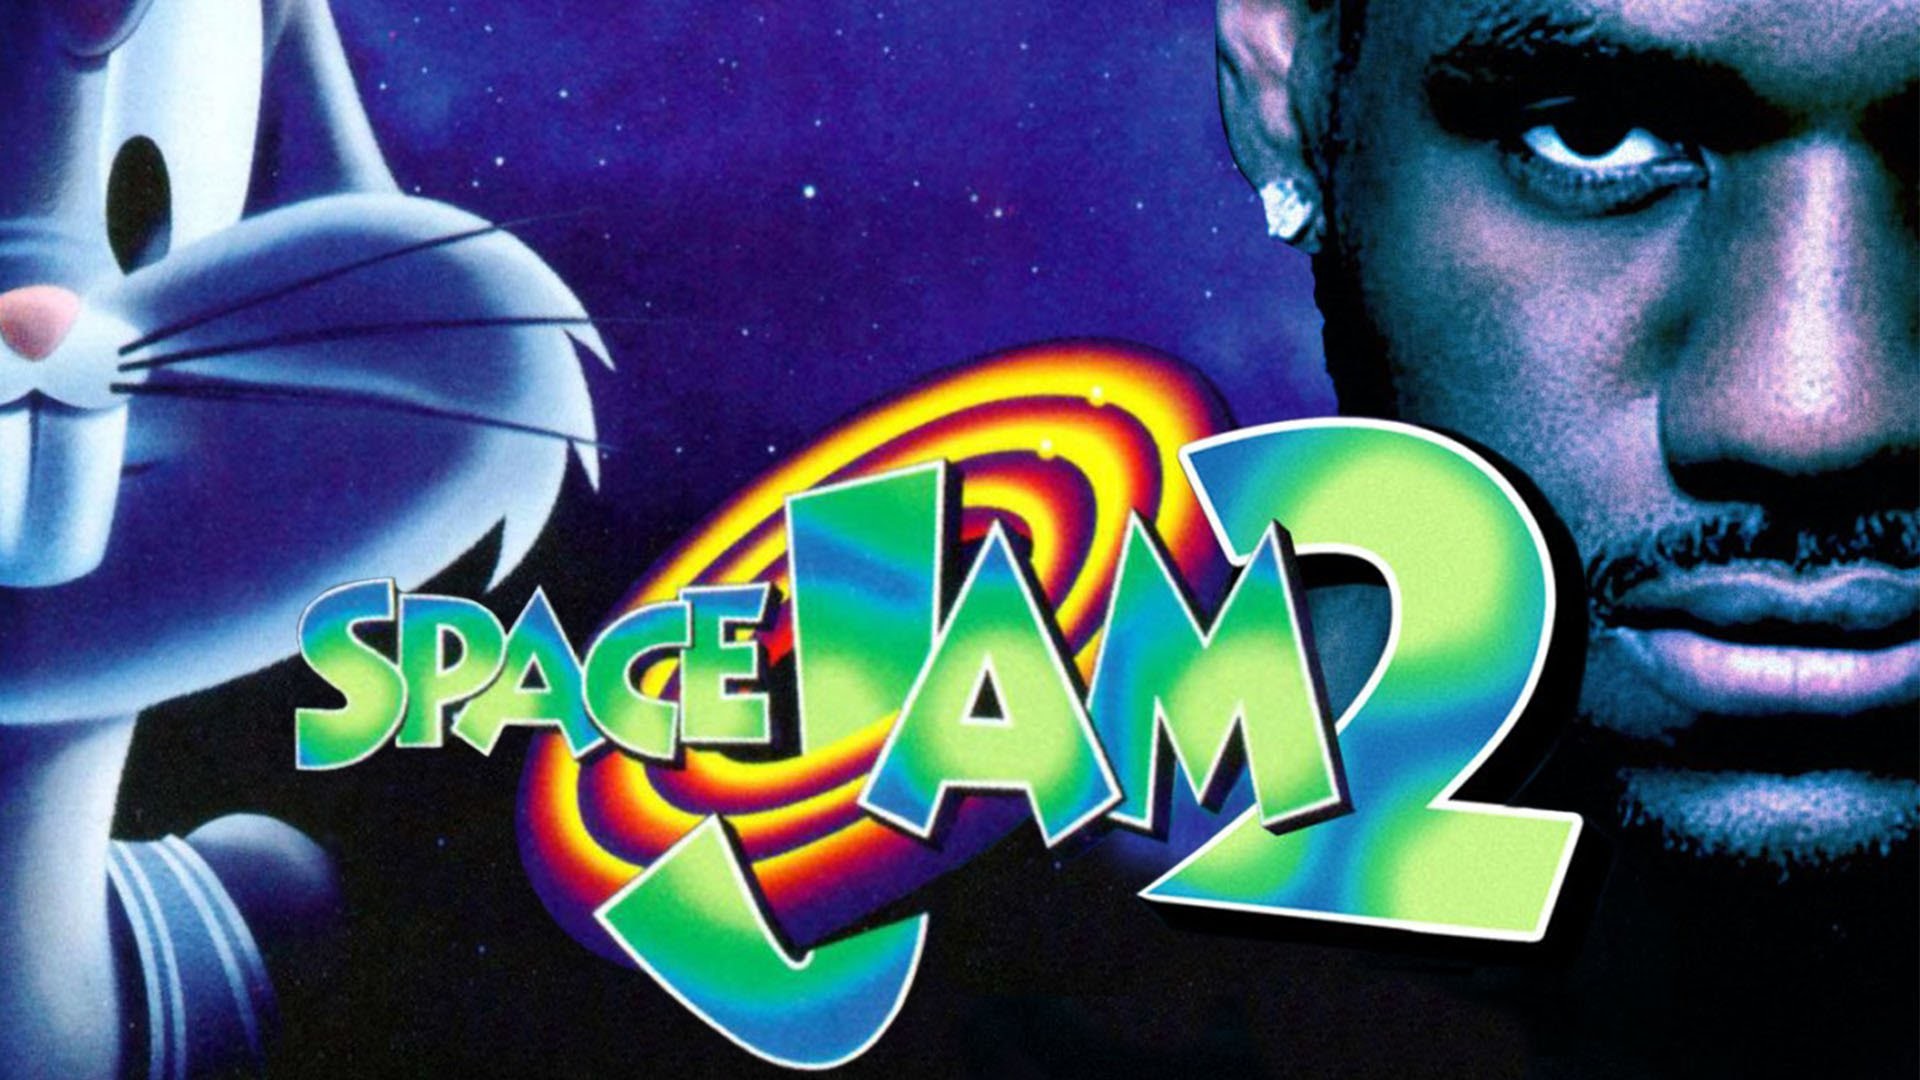 1920x1080 Space Jam Wallpapers 68 images.